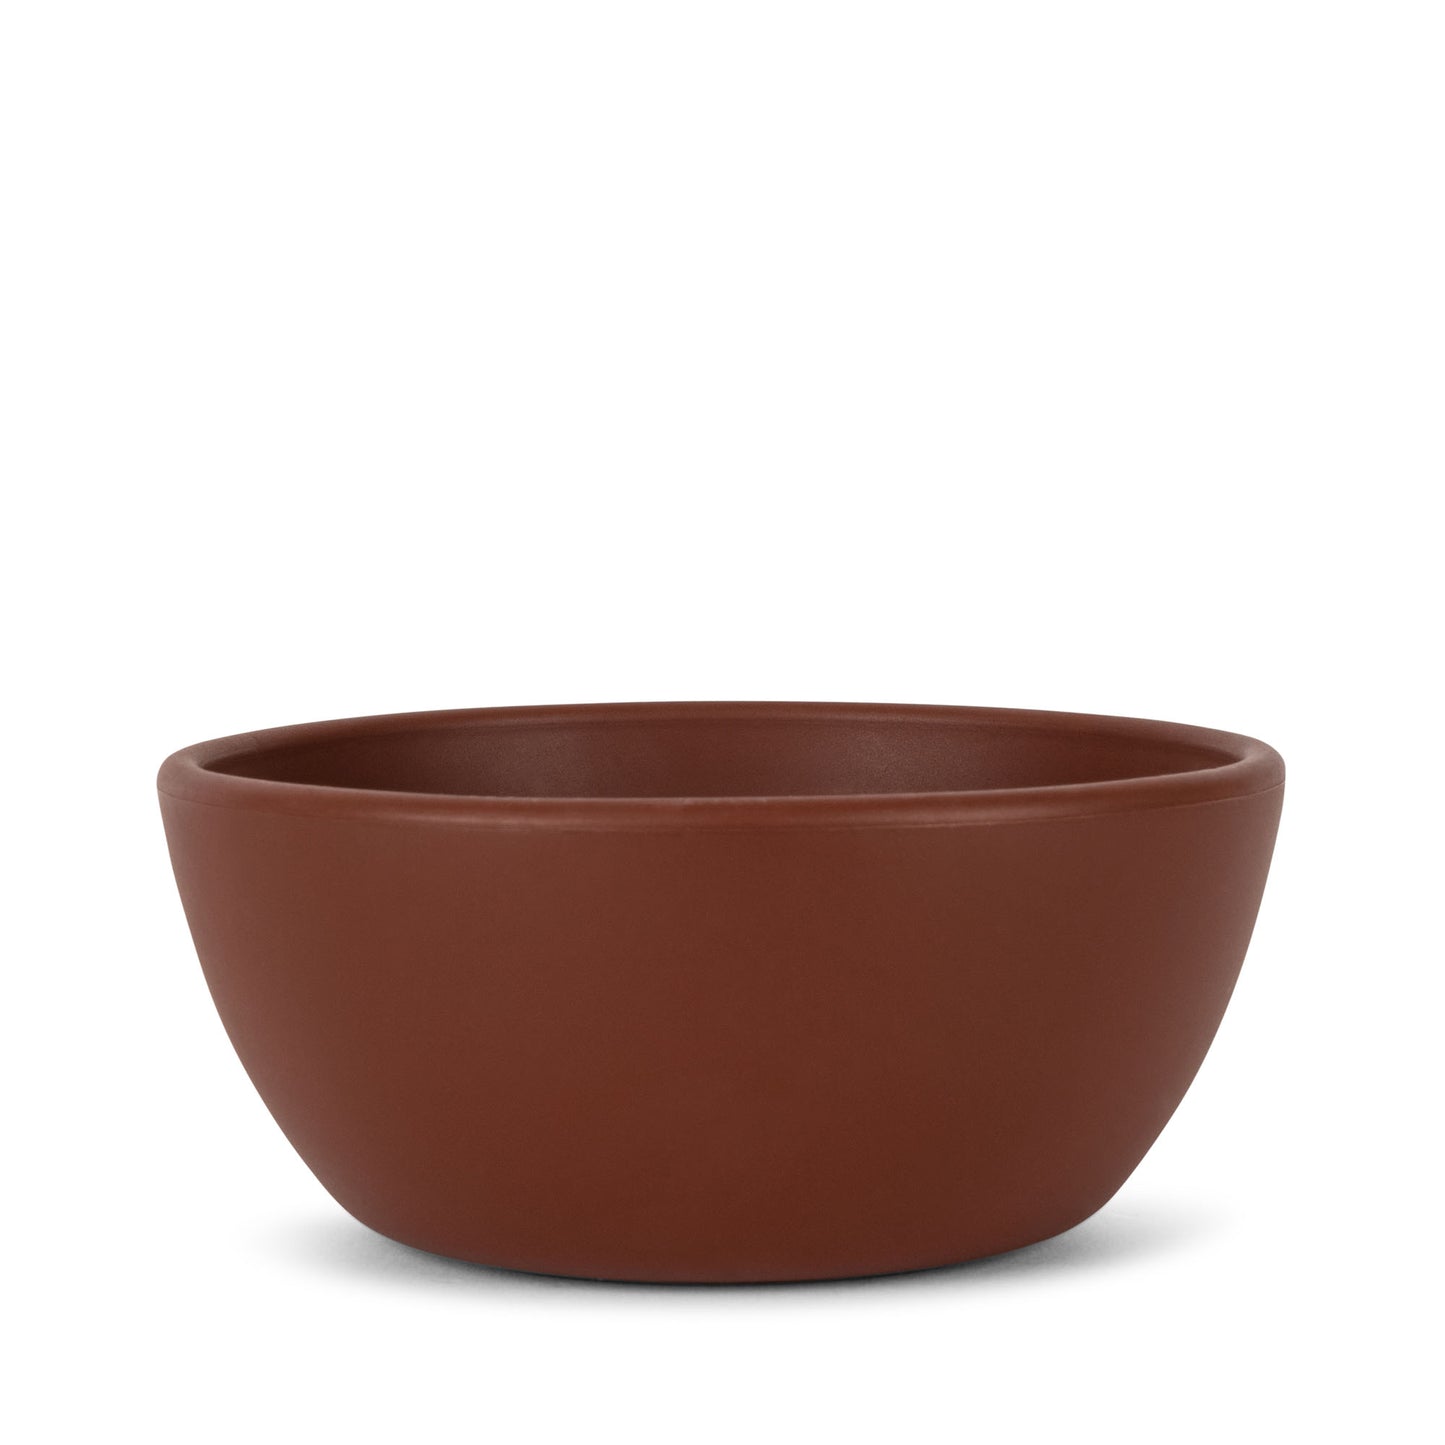 2 Pack Small Snack Bowls, Cherry/Mocca